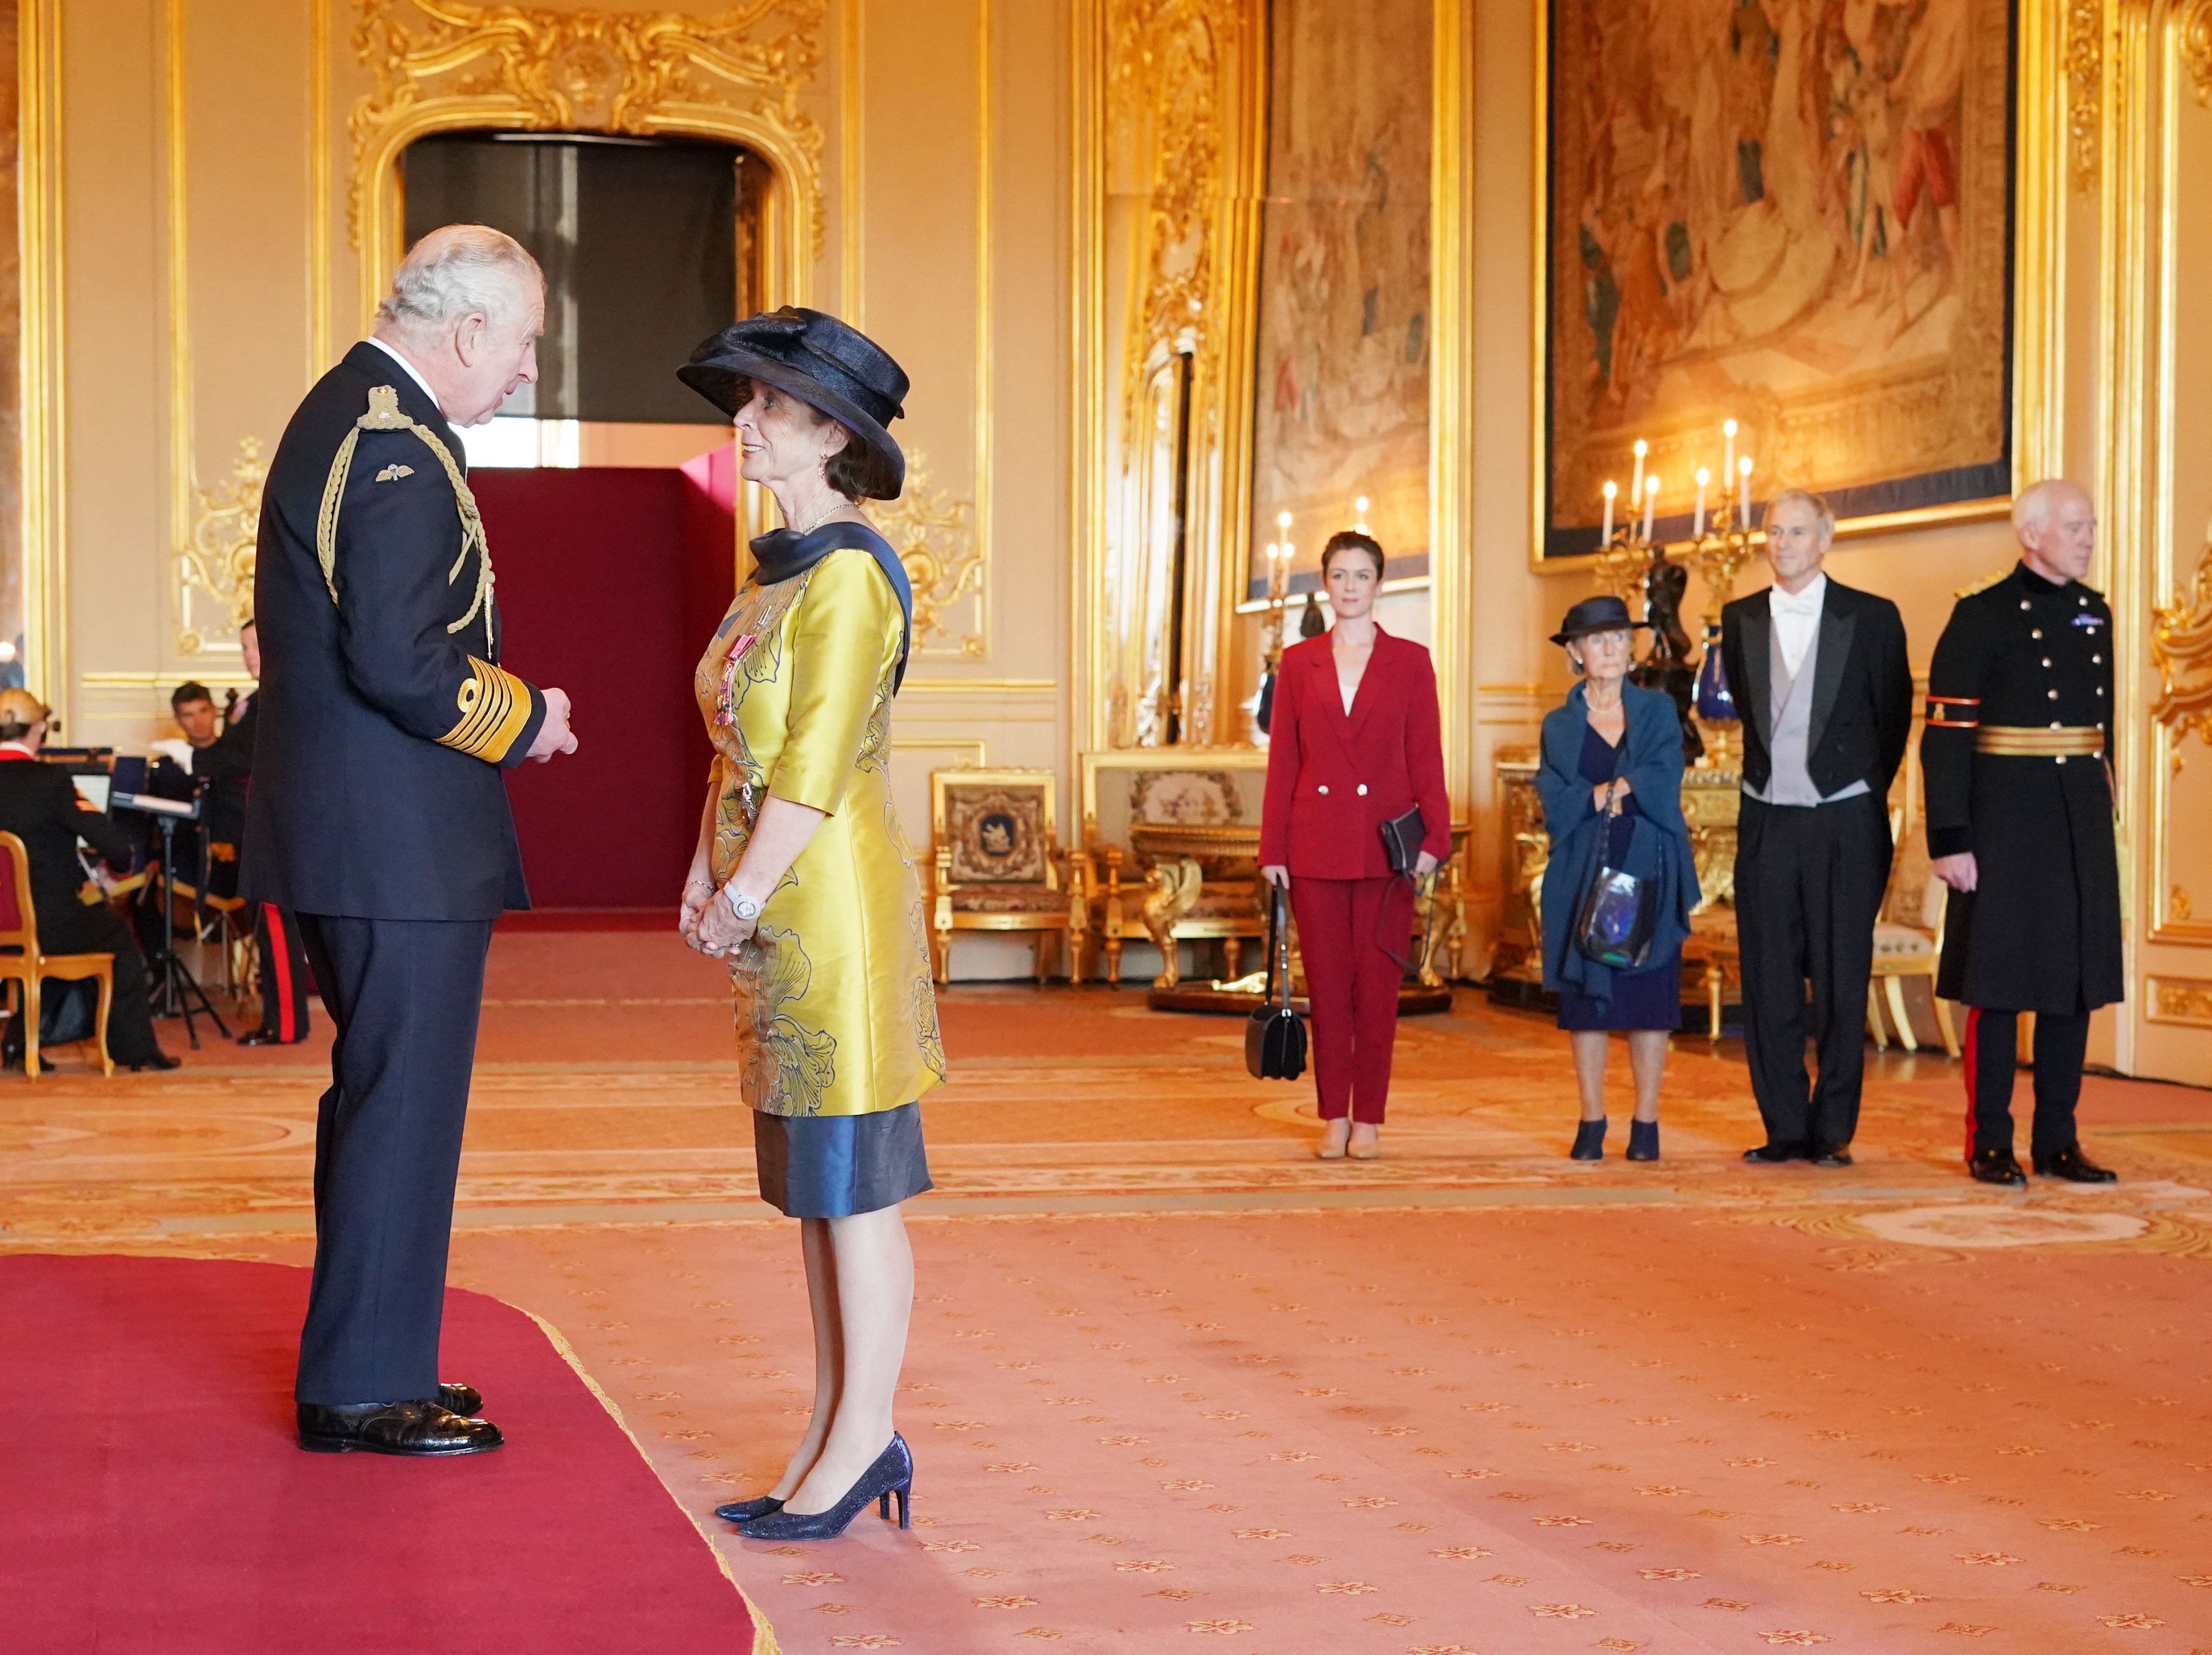 Louise Richardson being bestowed her insignia as Dame Commander of the Most Excellent Order of the British Empire (DBE) by King Charles III at Windsor Castle.